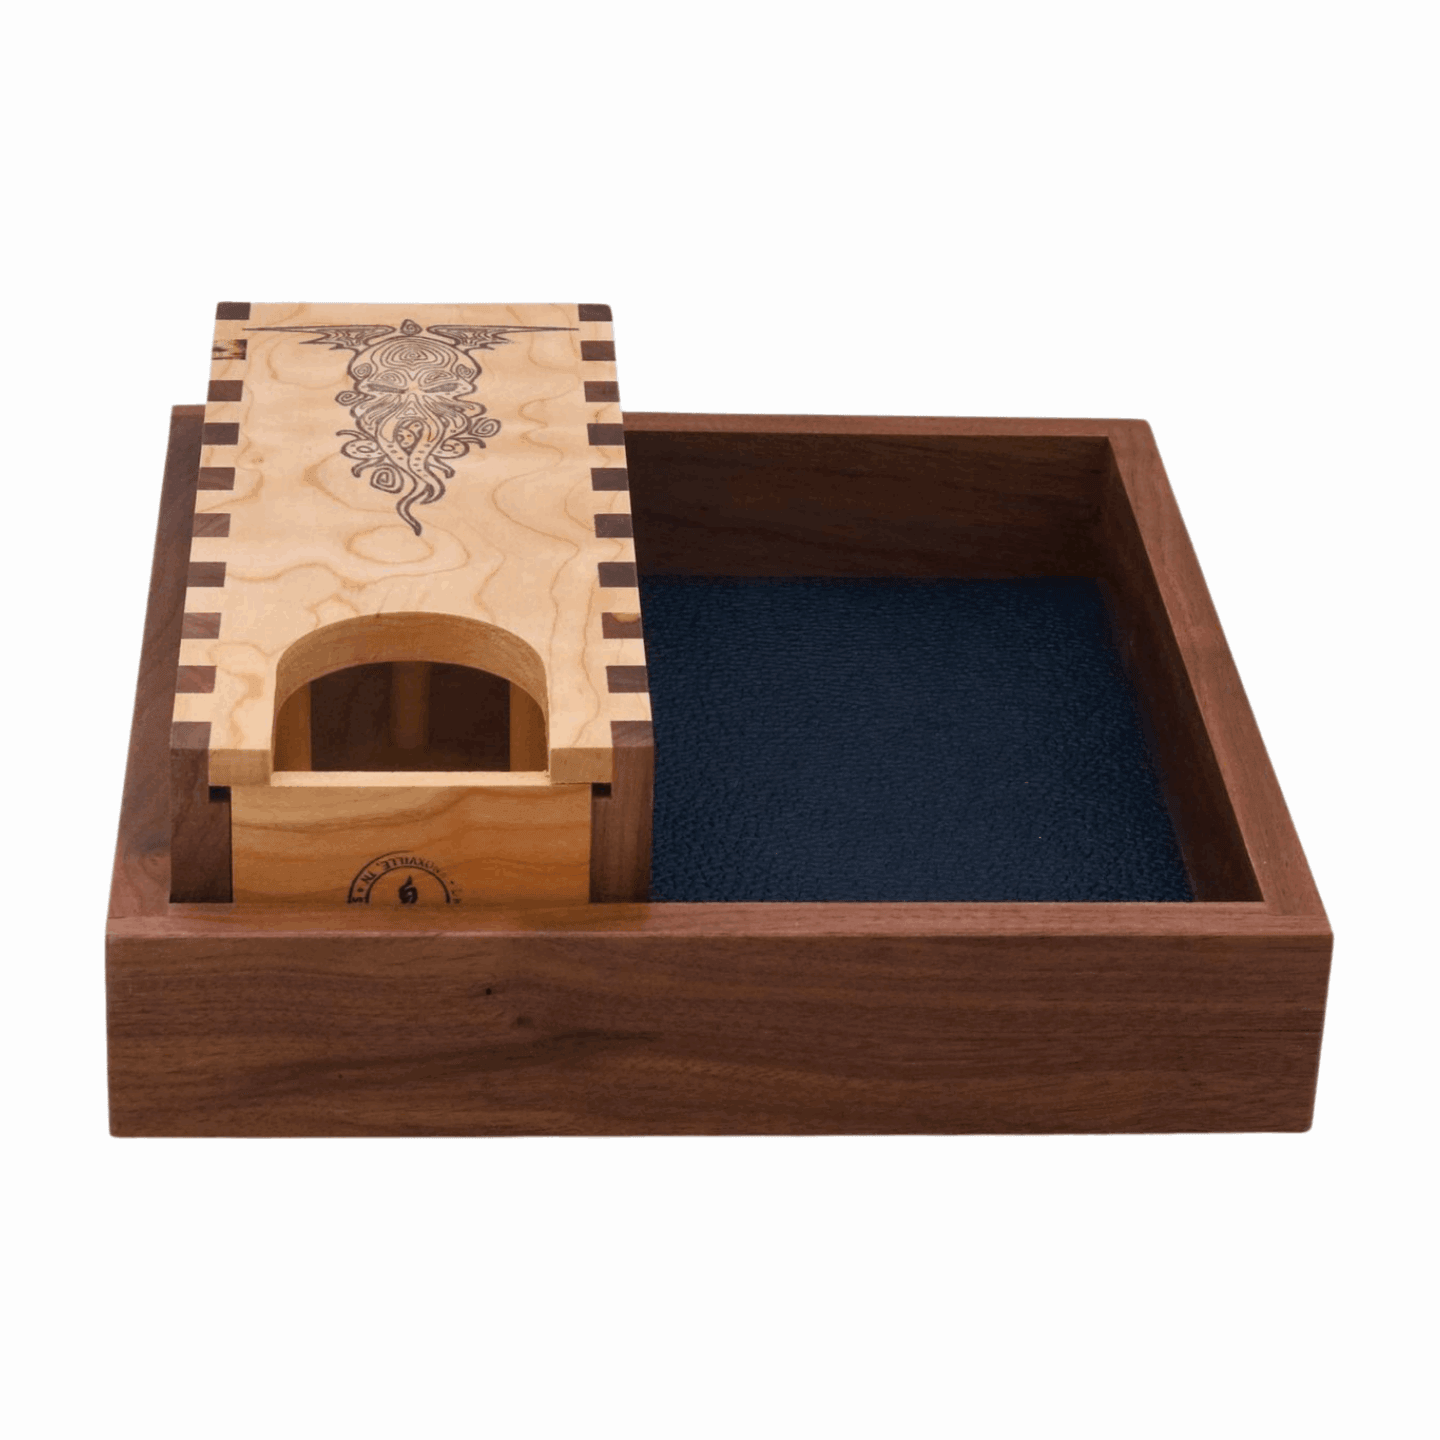 Wooden Cthulhu Dice Roller in Walnut Dice Tray  - Dragon Armor Games